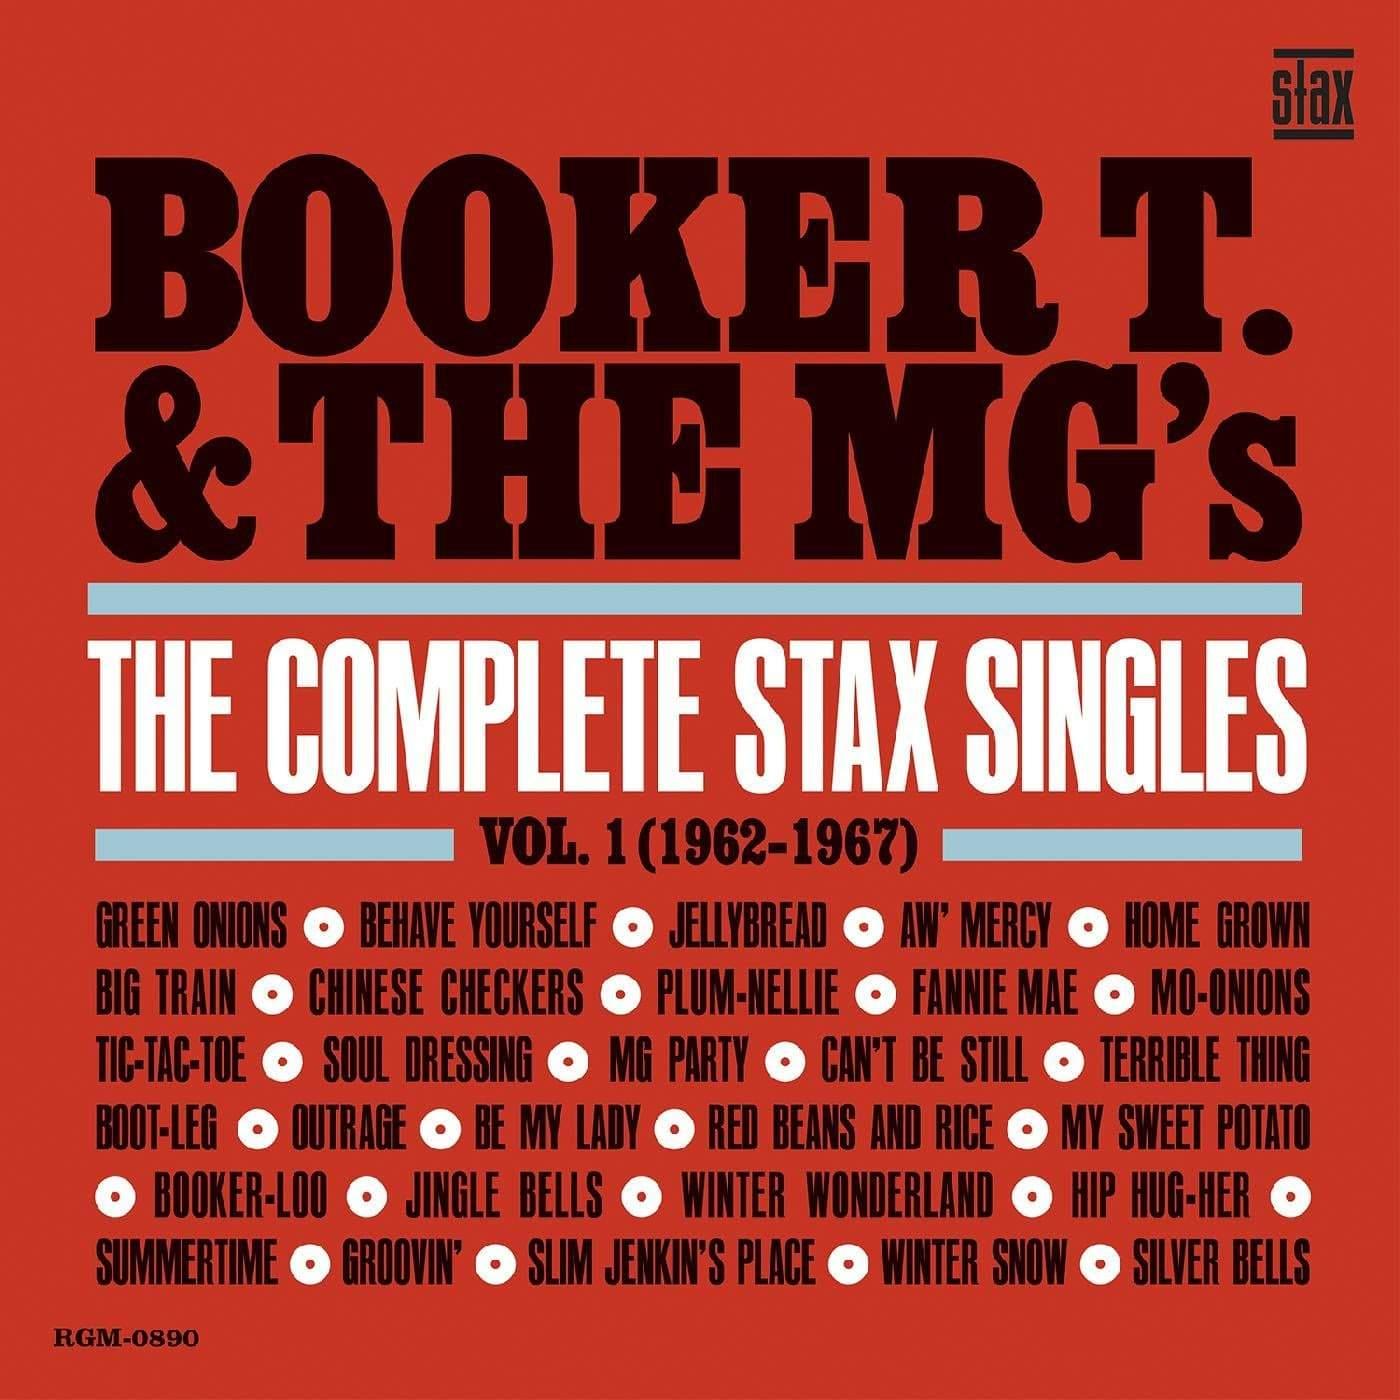 Booker T. & the MG's - The Complete Stax Singles Vol. 1 (1962-1967) (2-LP, Red Vinyl) - Joco Records